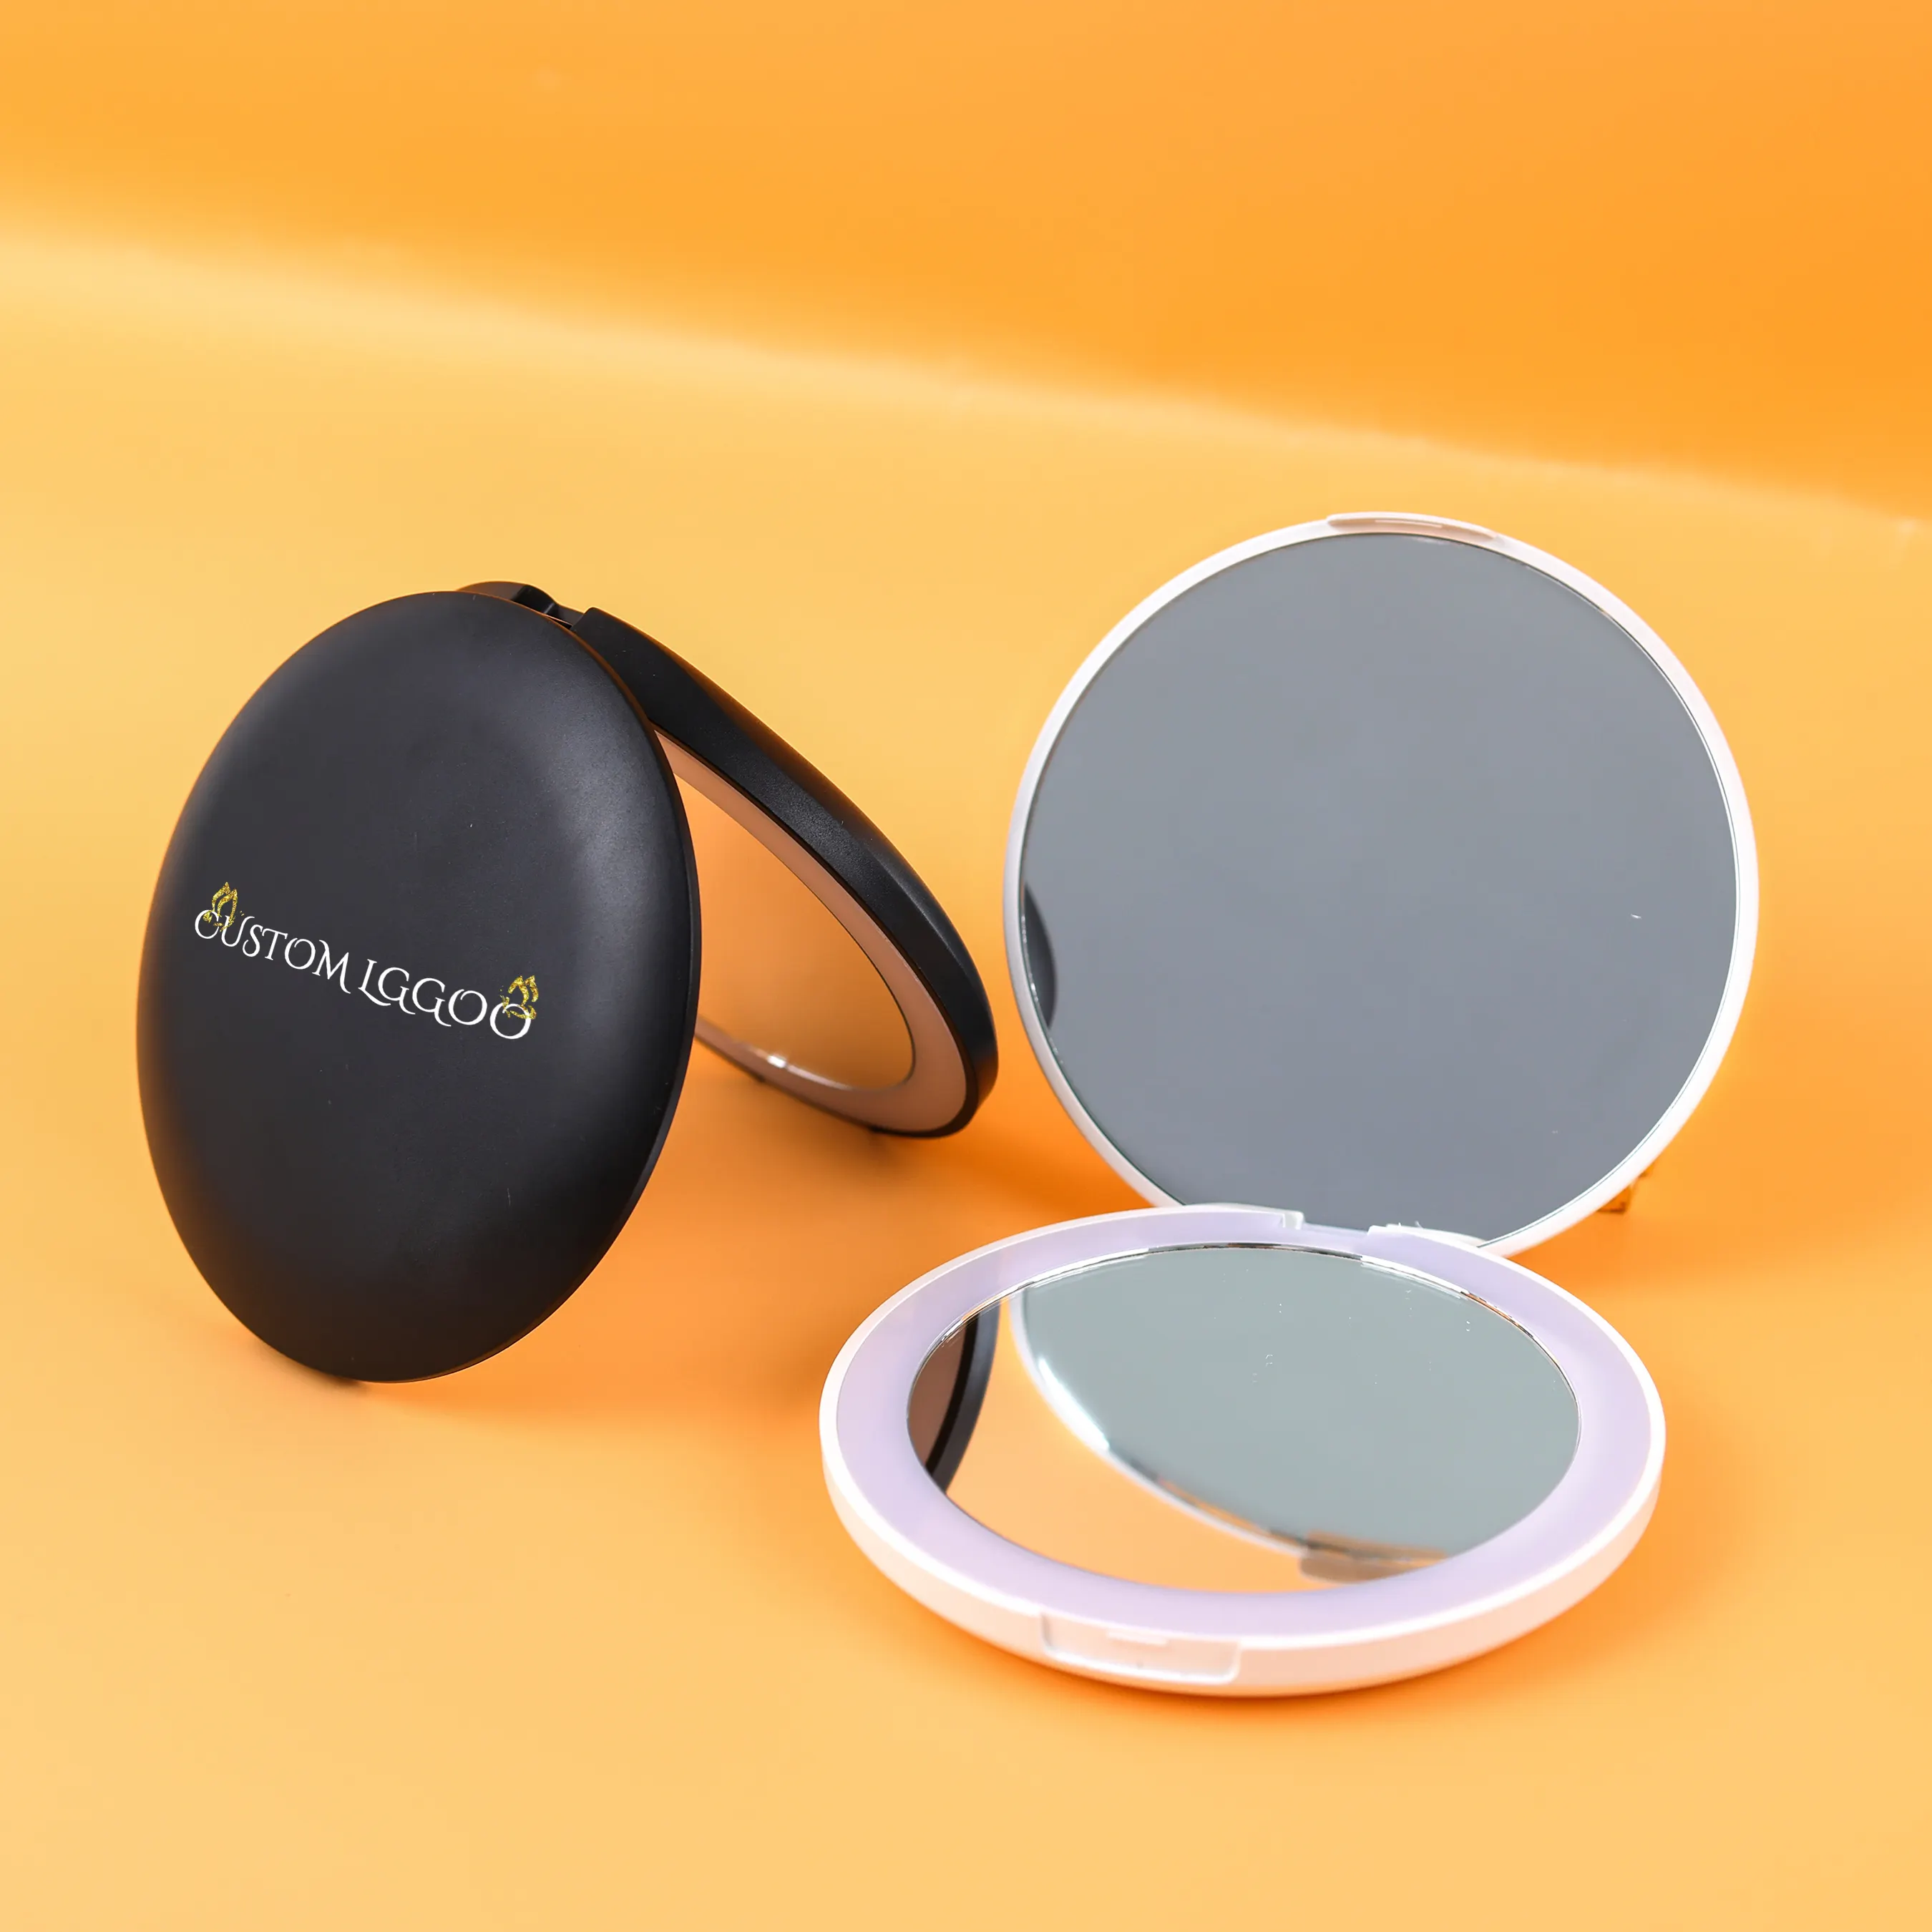 Round Small Pocket Mirrors With Led Light Double Sided Folding Makeup Mirrors Cosmetic LED Pocket Mirror